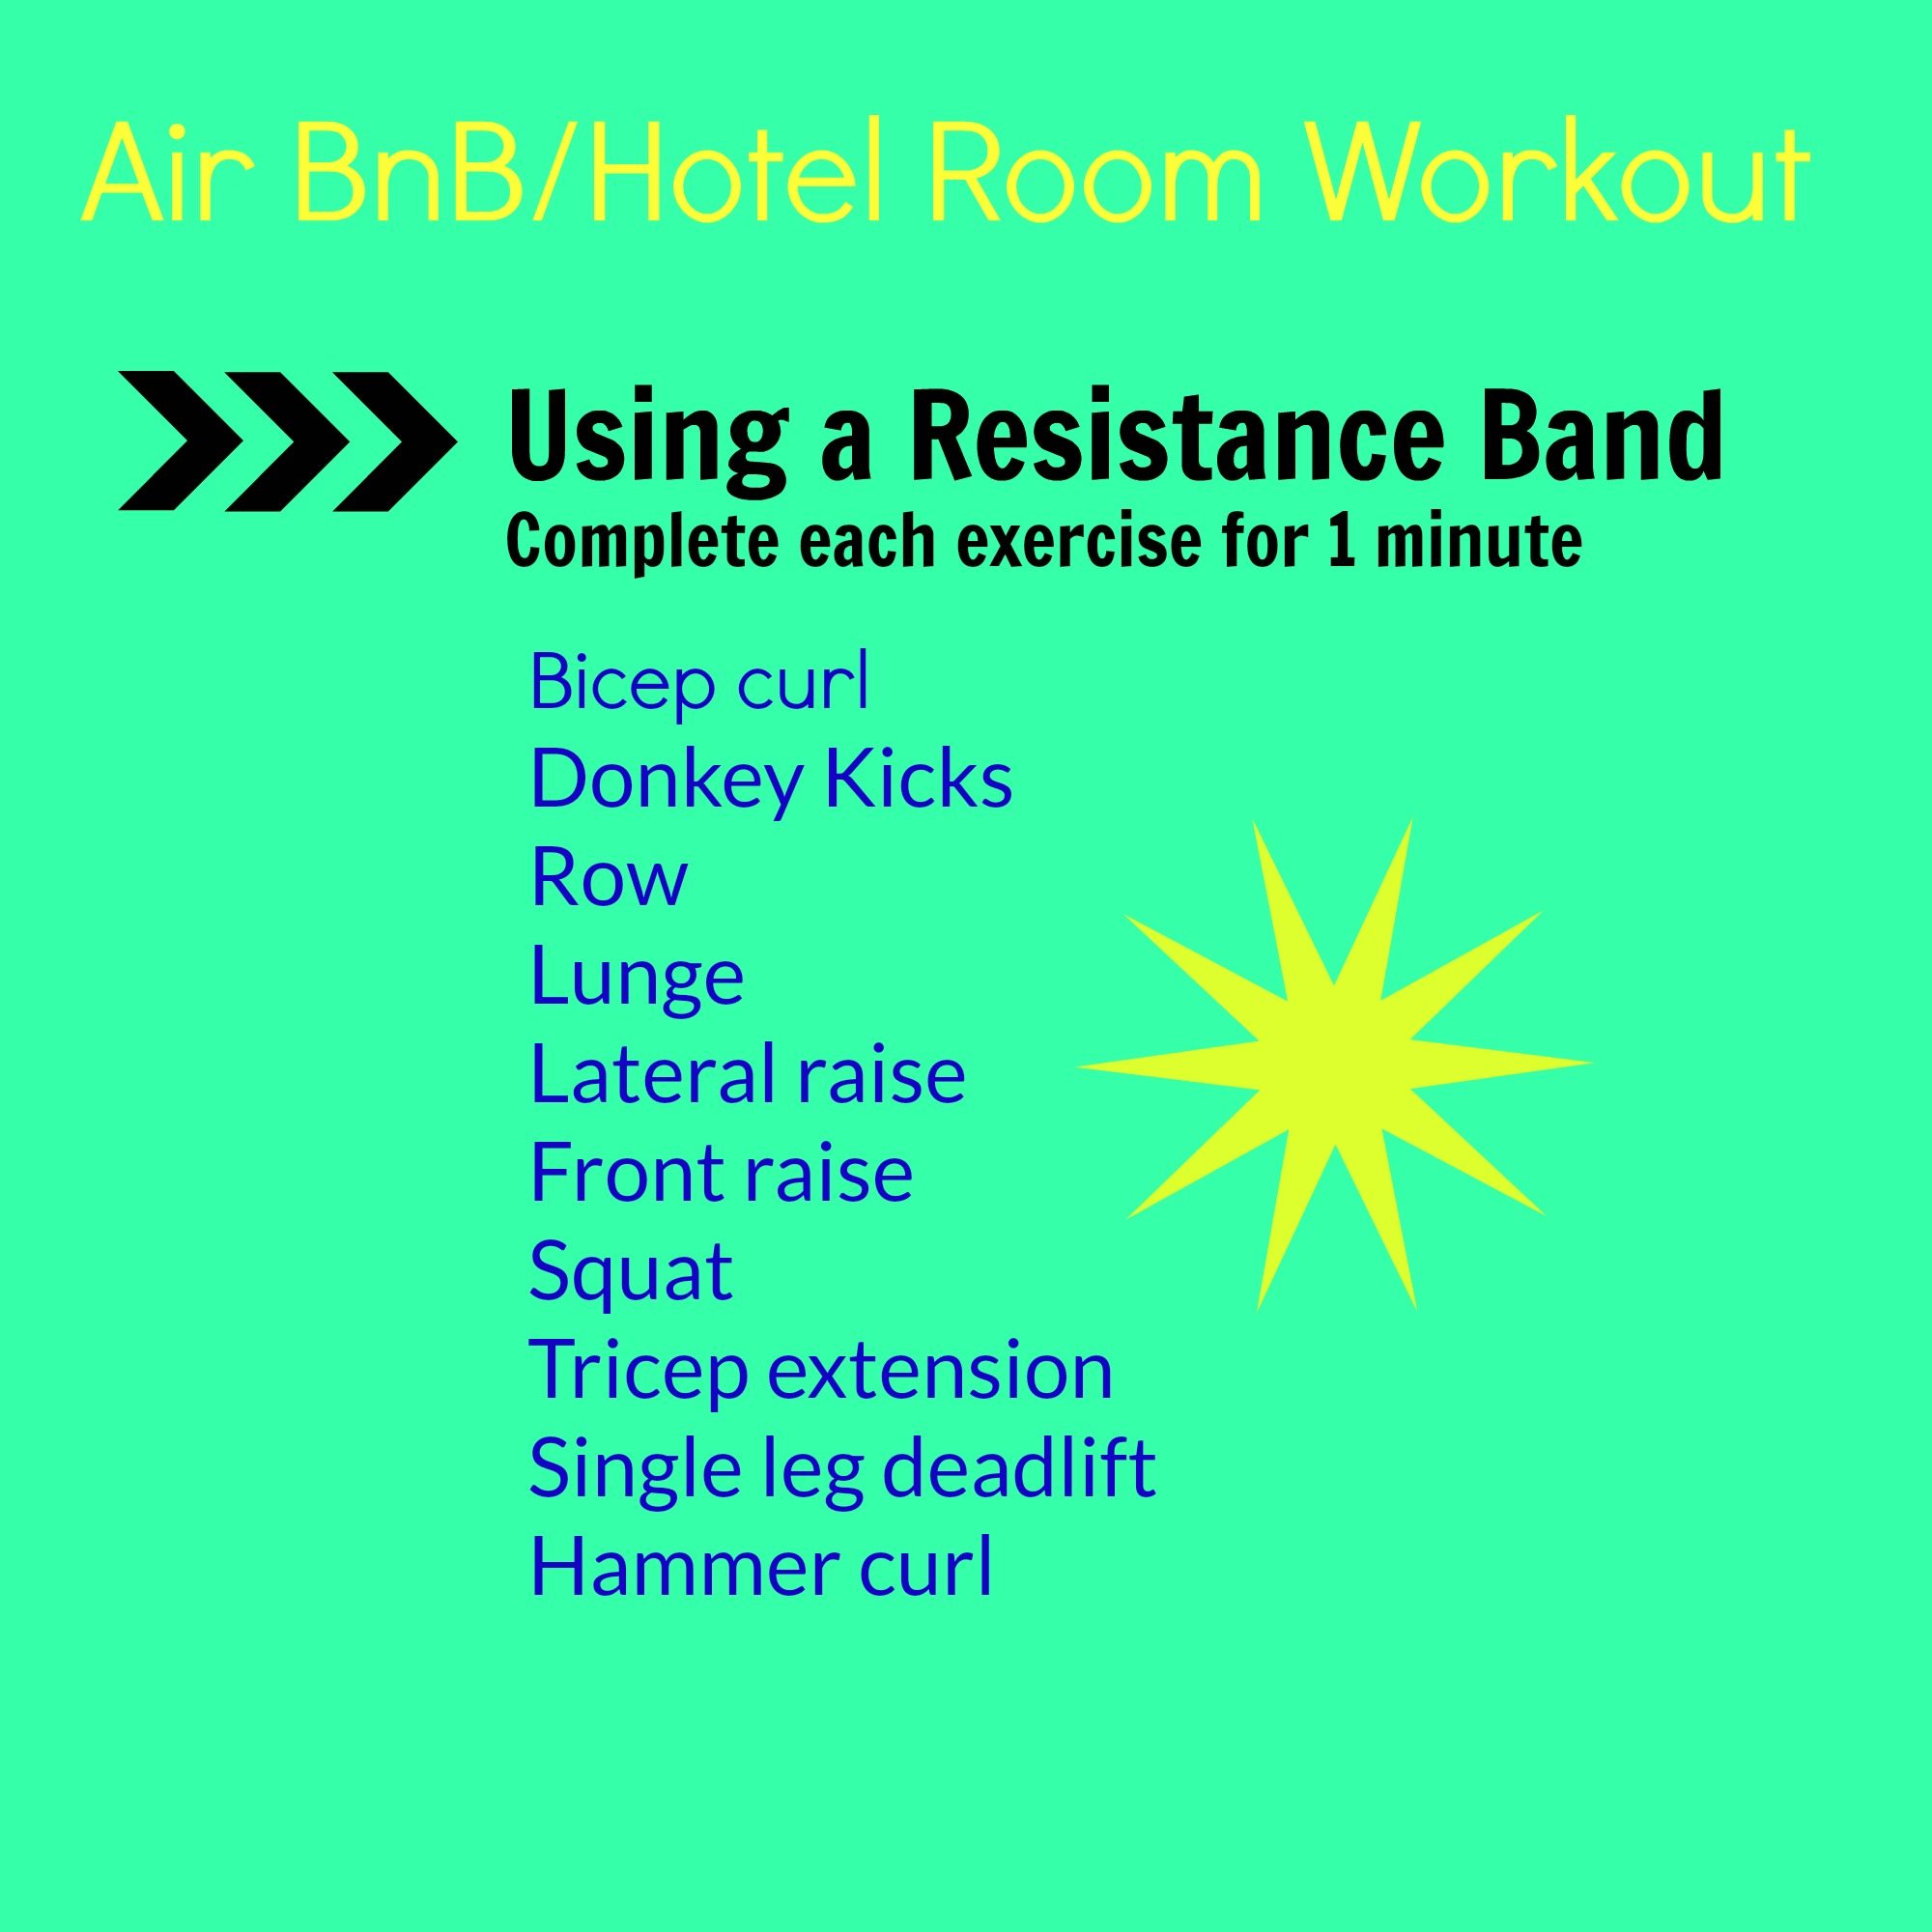 AirBnB Hotel workout